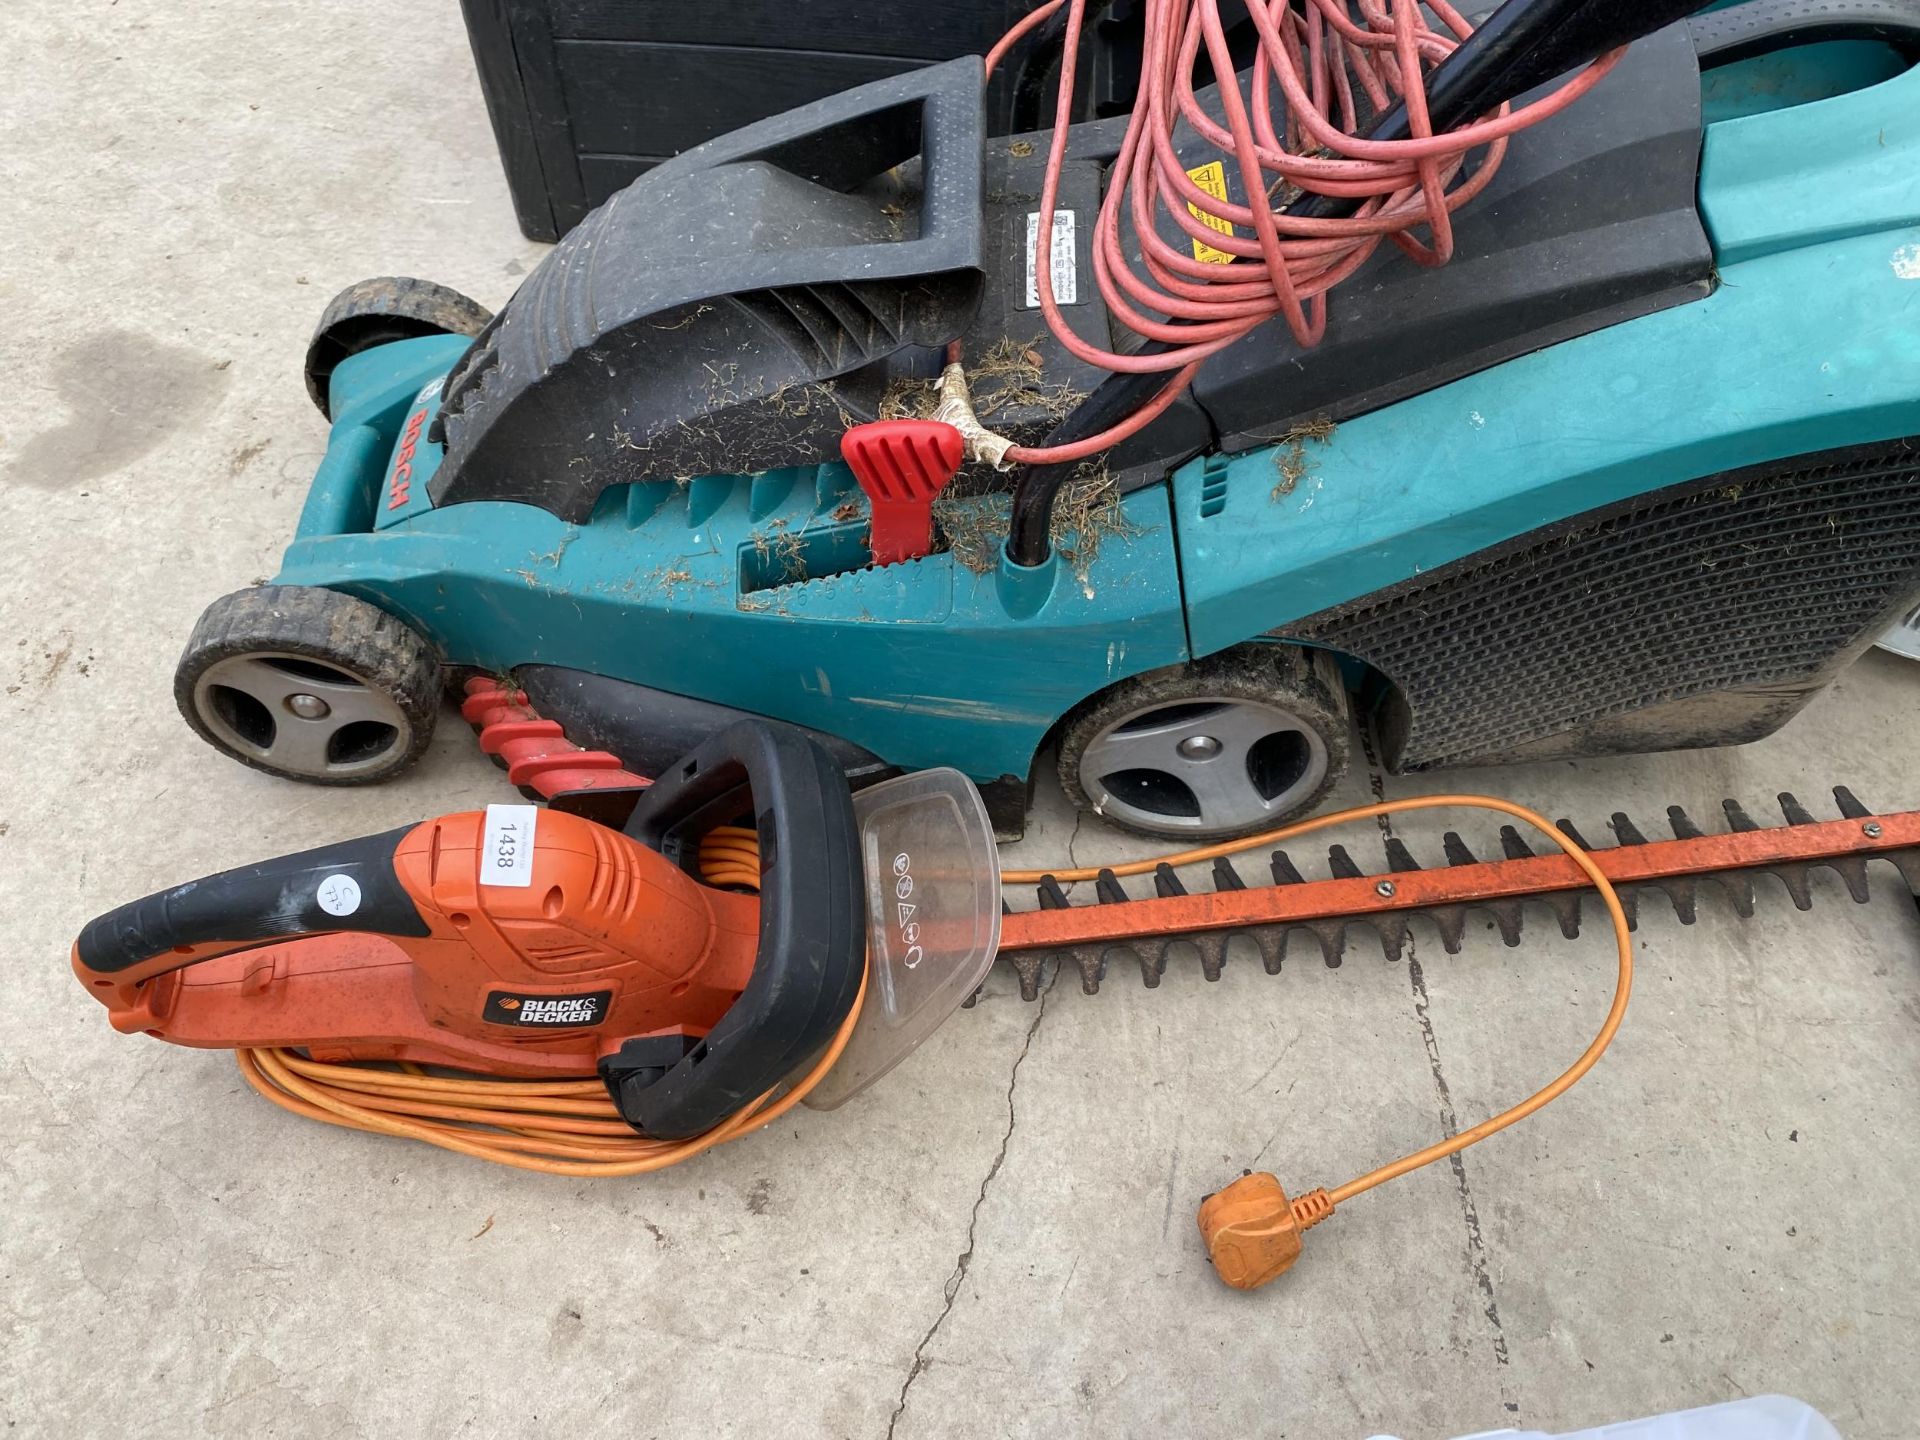 A BOSCH ROTAK 36 ELECTRIC LAWN MOWER AND A BLACK AND DECKER ELECTRIC HEDGE TRIMMER - Image 2 of 2